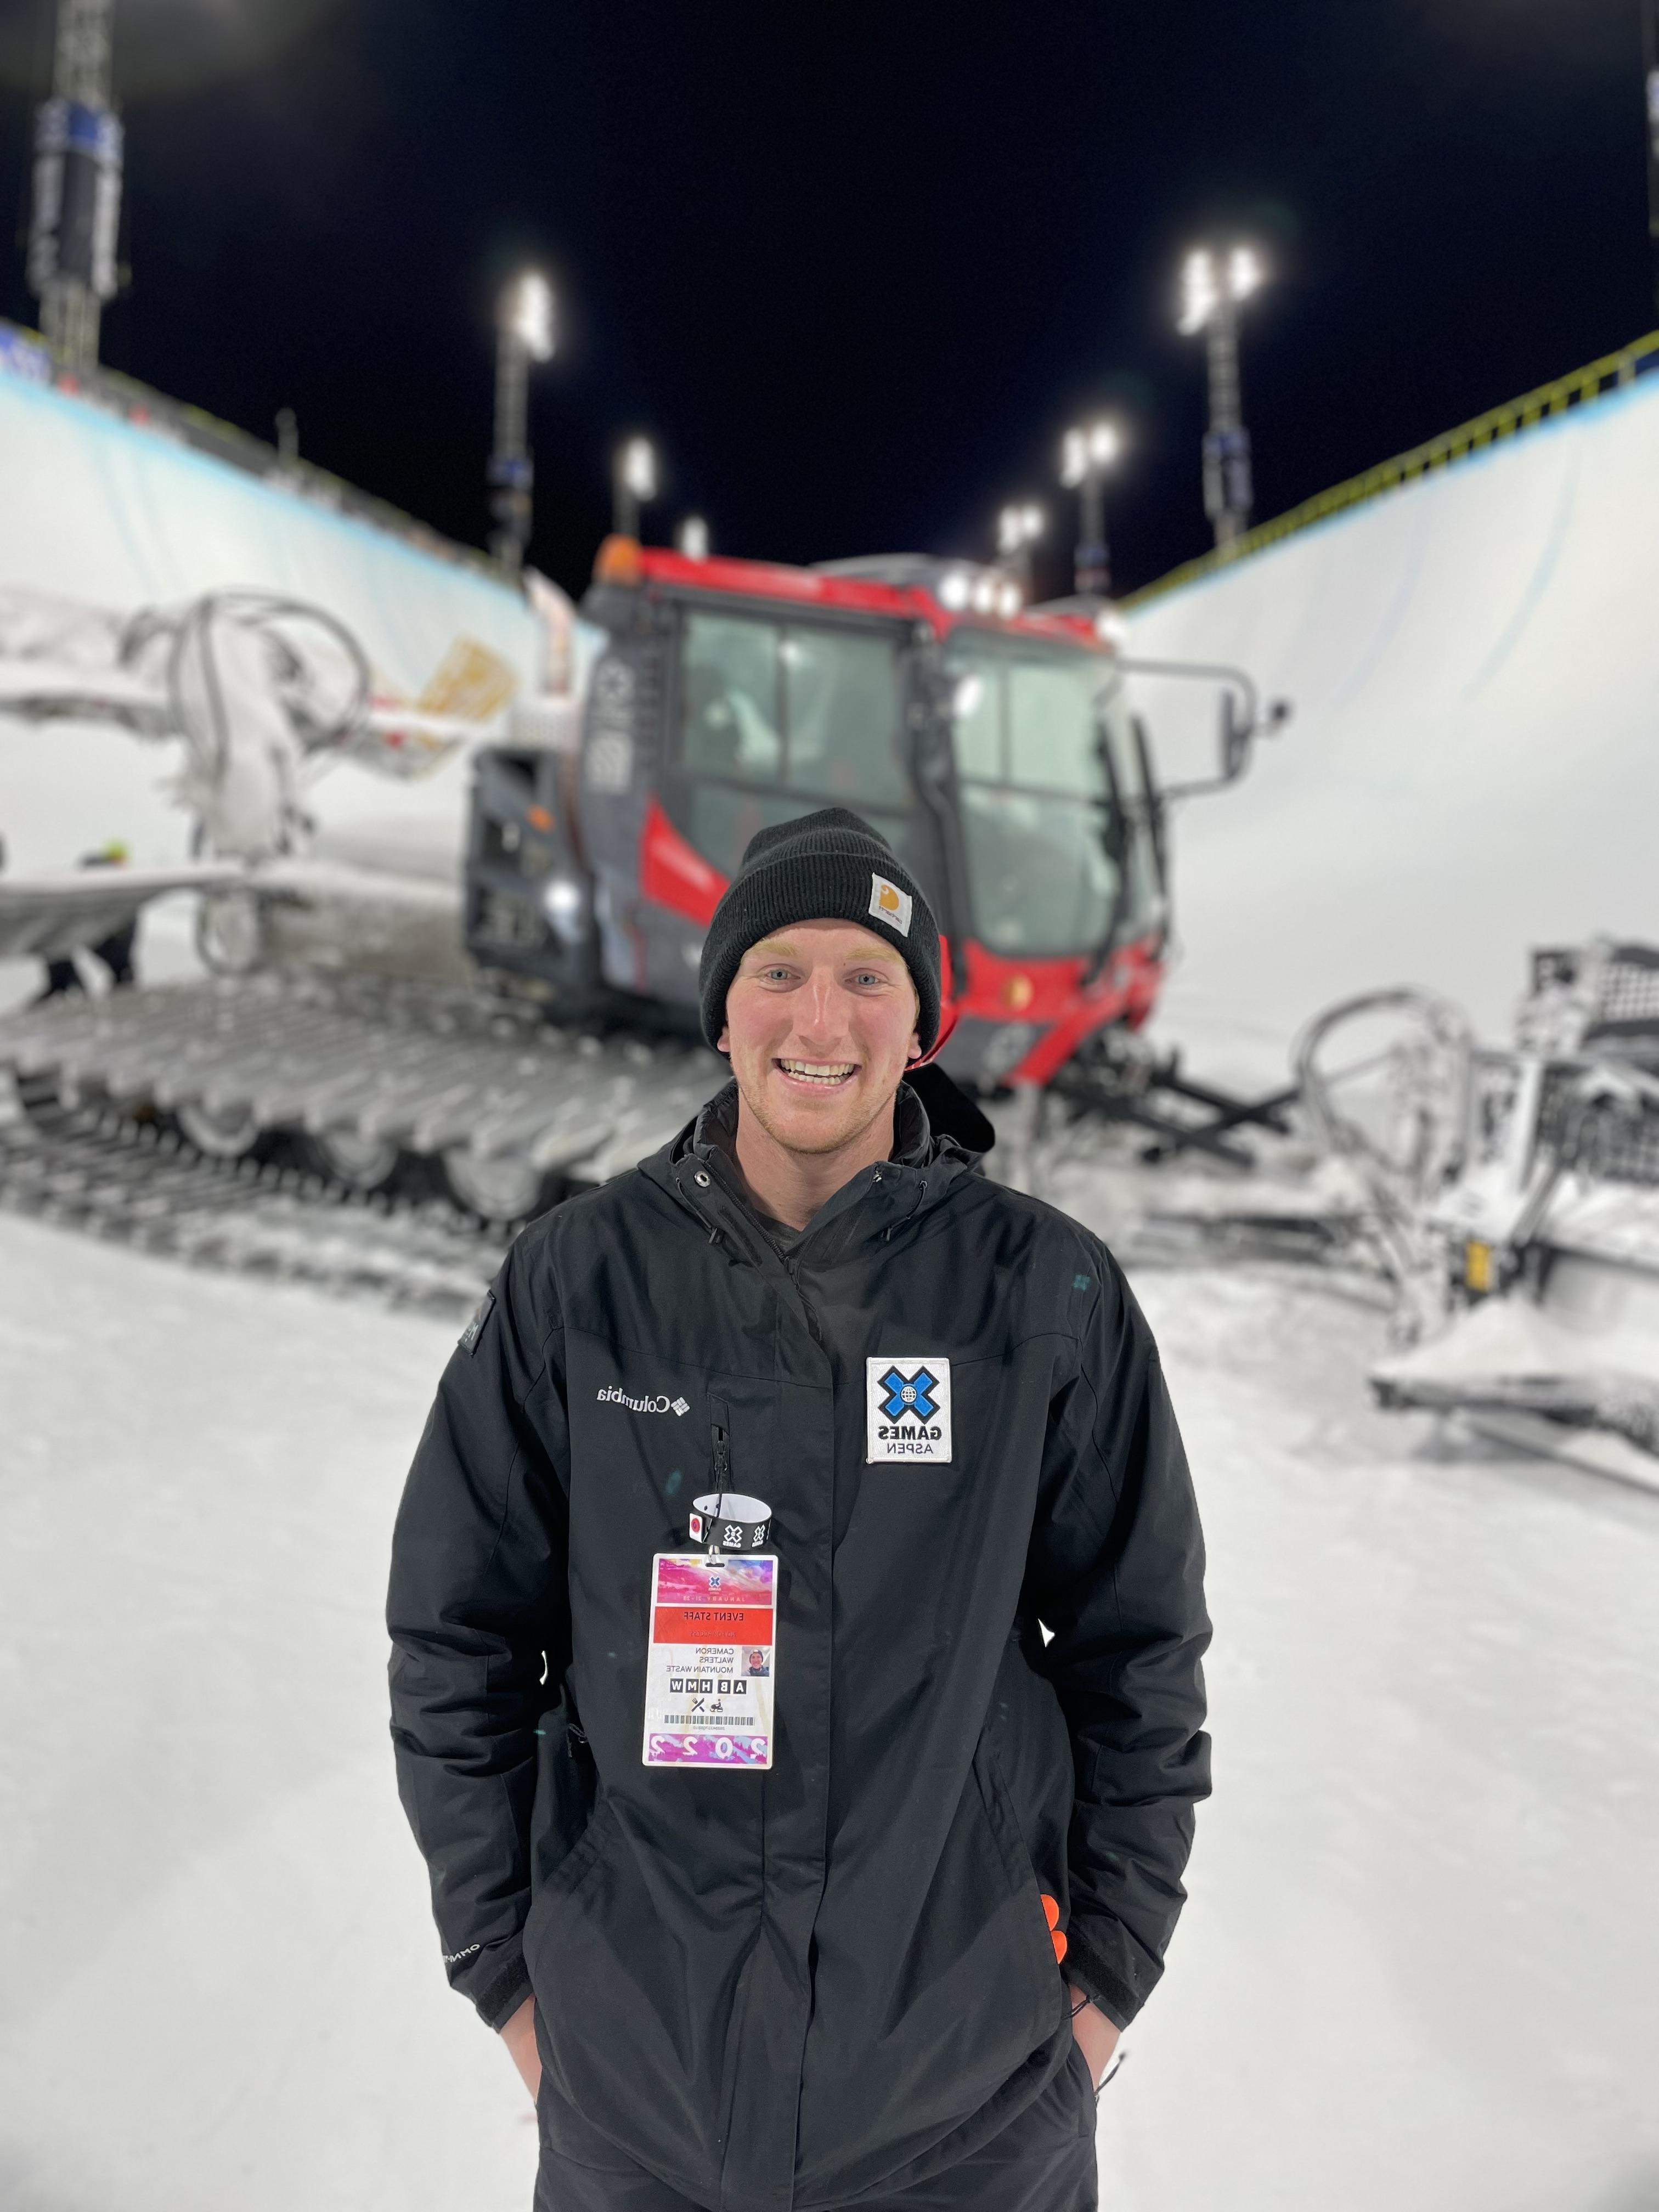 While I was a student, I got the opportunity to work at the X Games in Aspen!